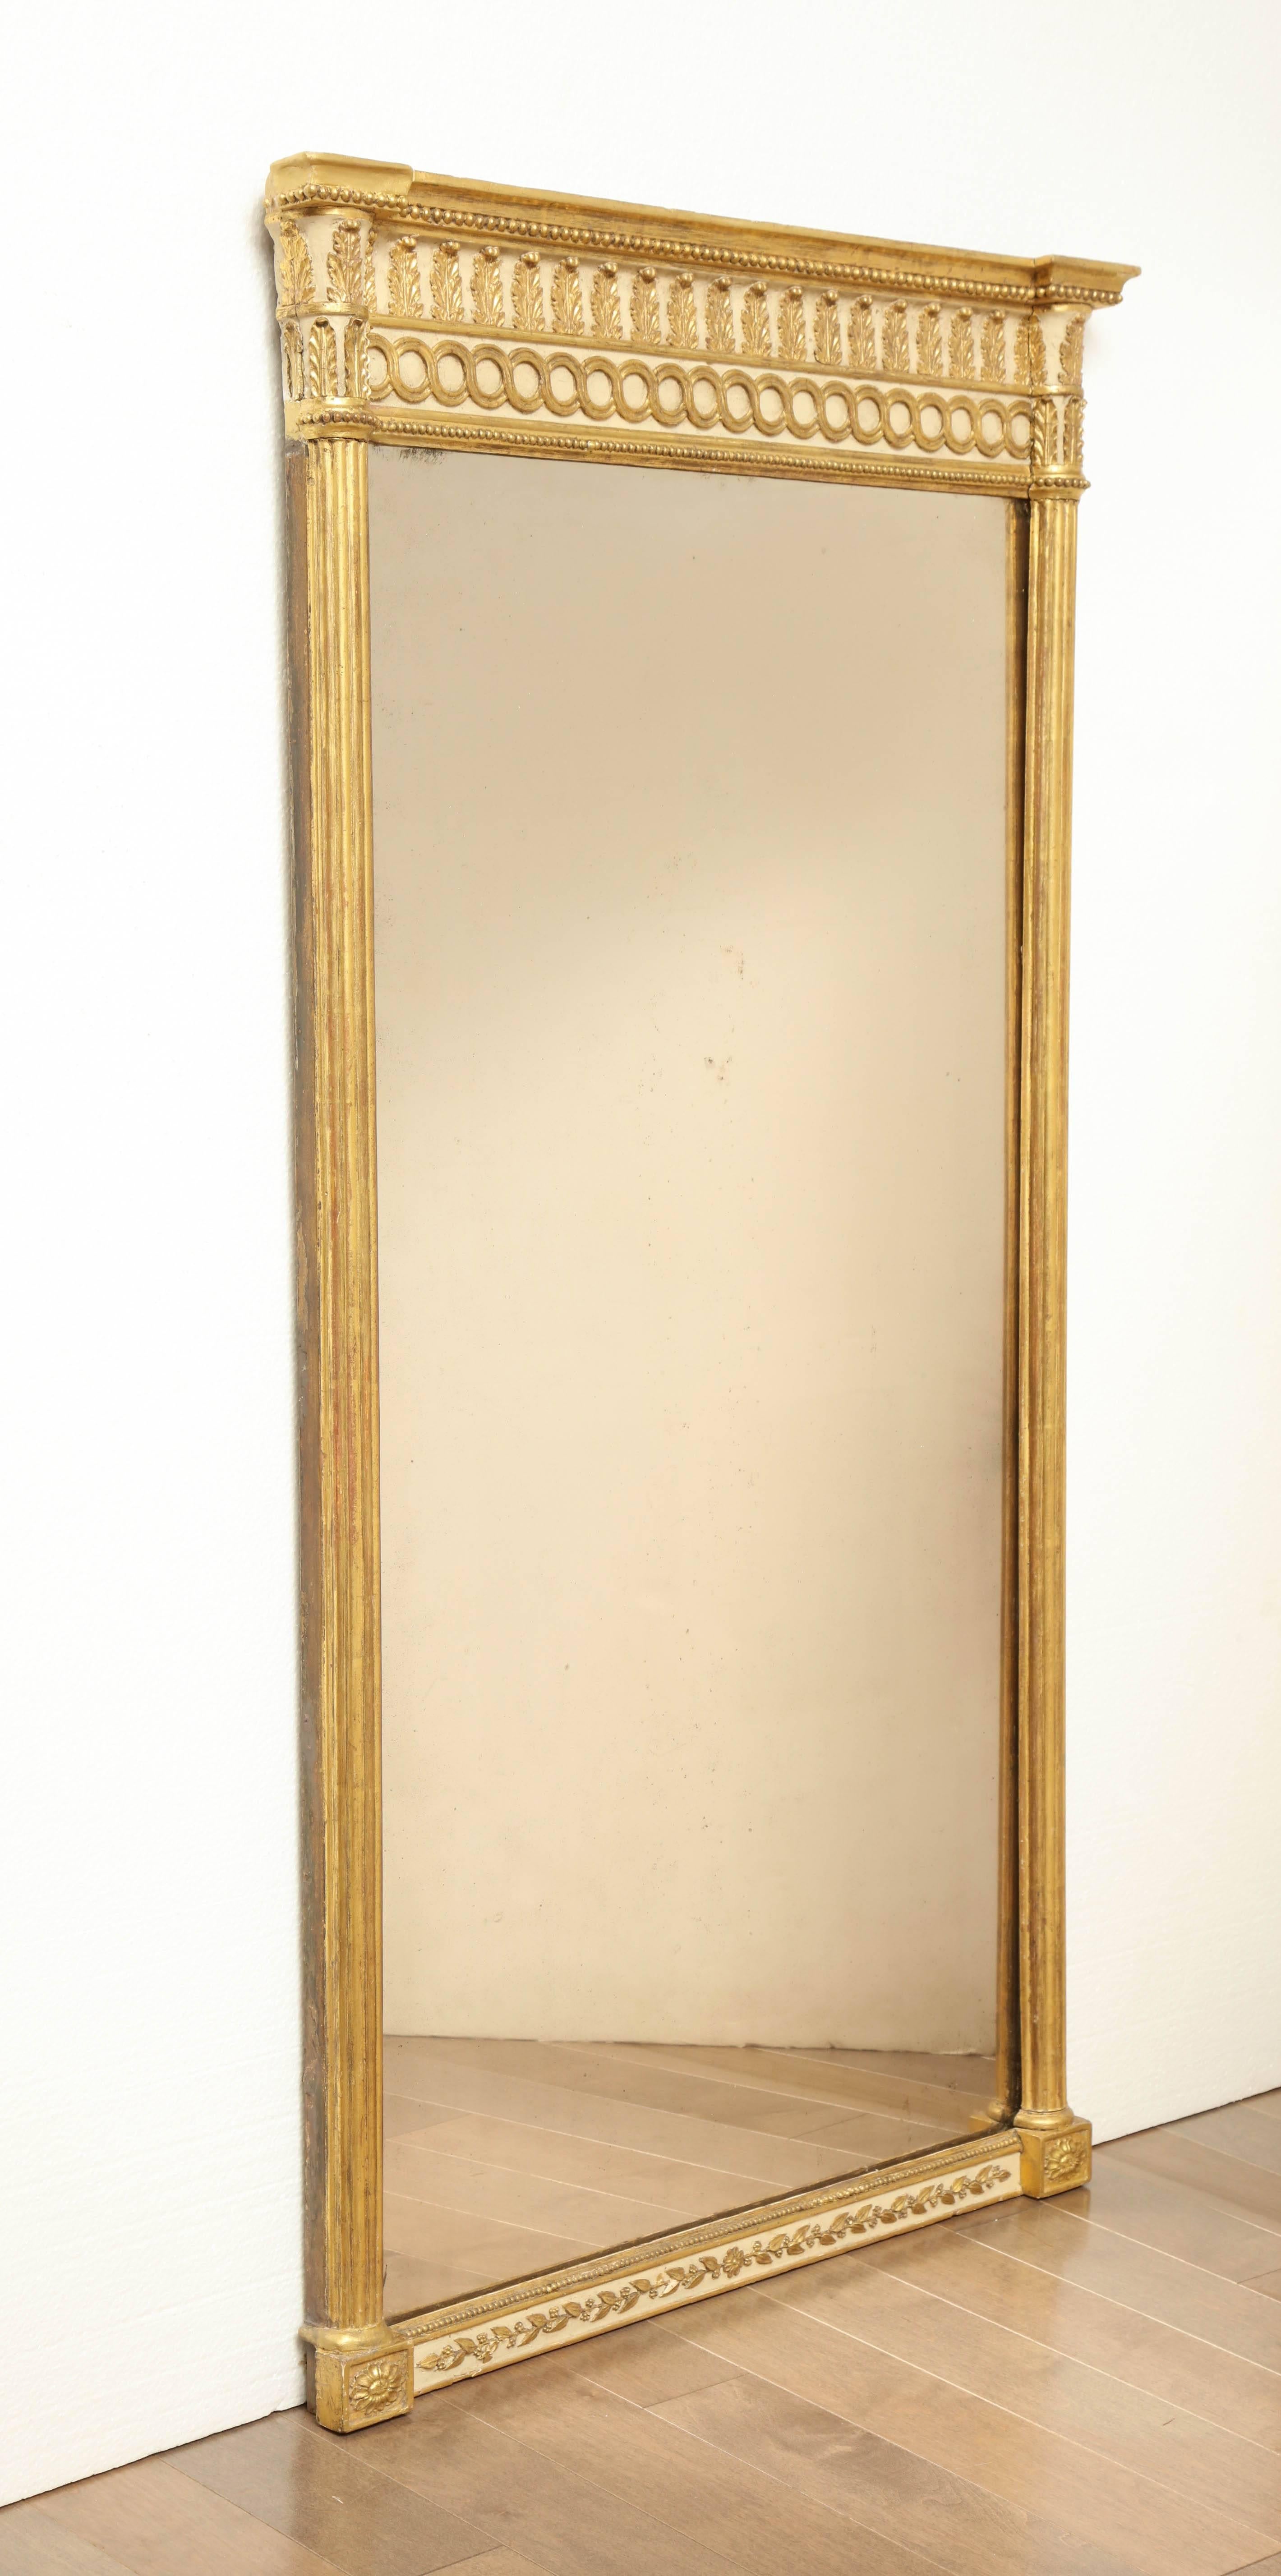 Early 19th century English Regency, gilded neoclassical mirror.